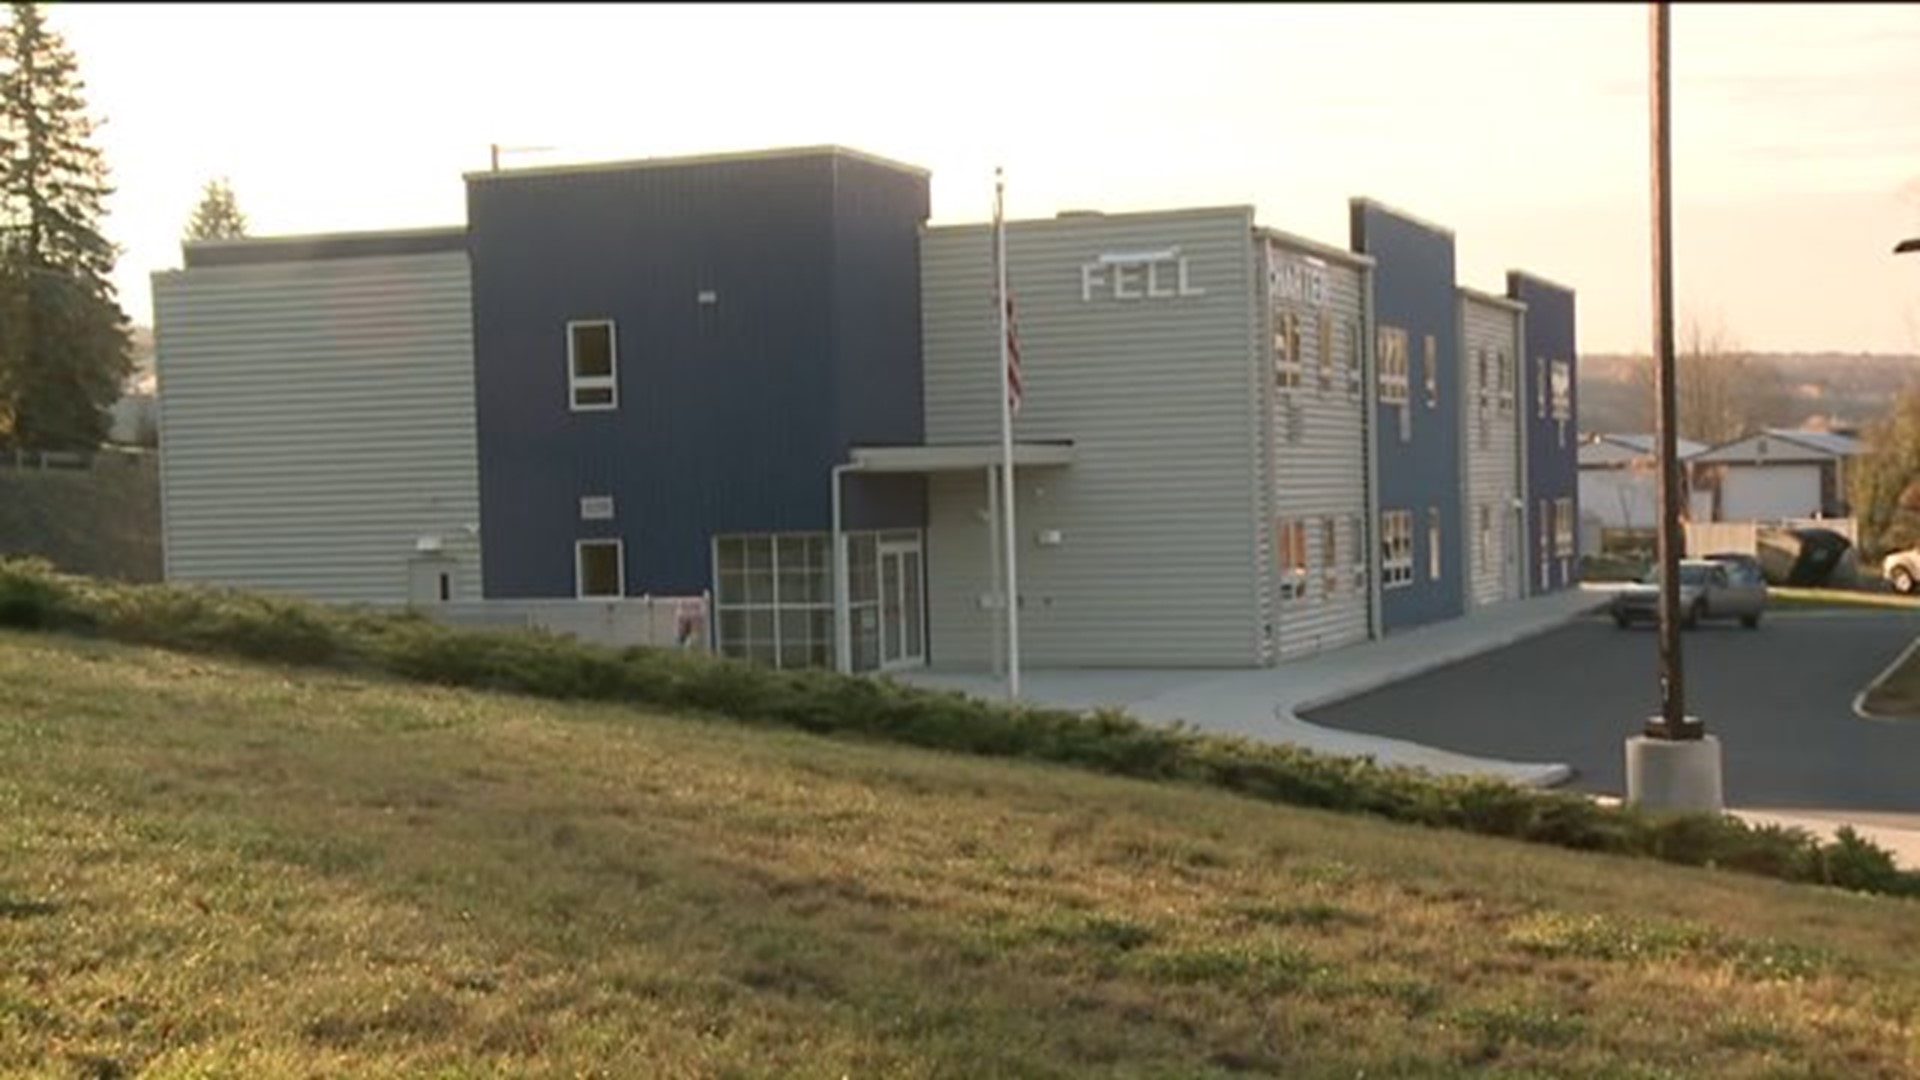 Working Without Pay at Fell Charter School